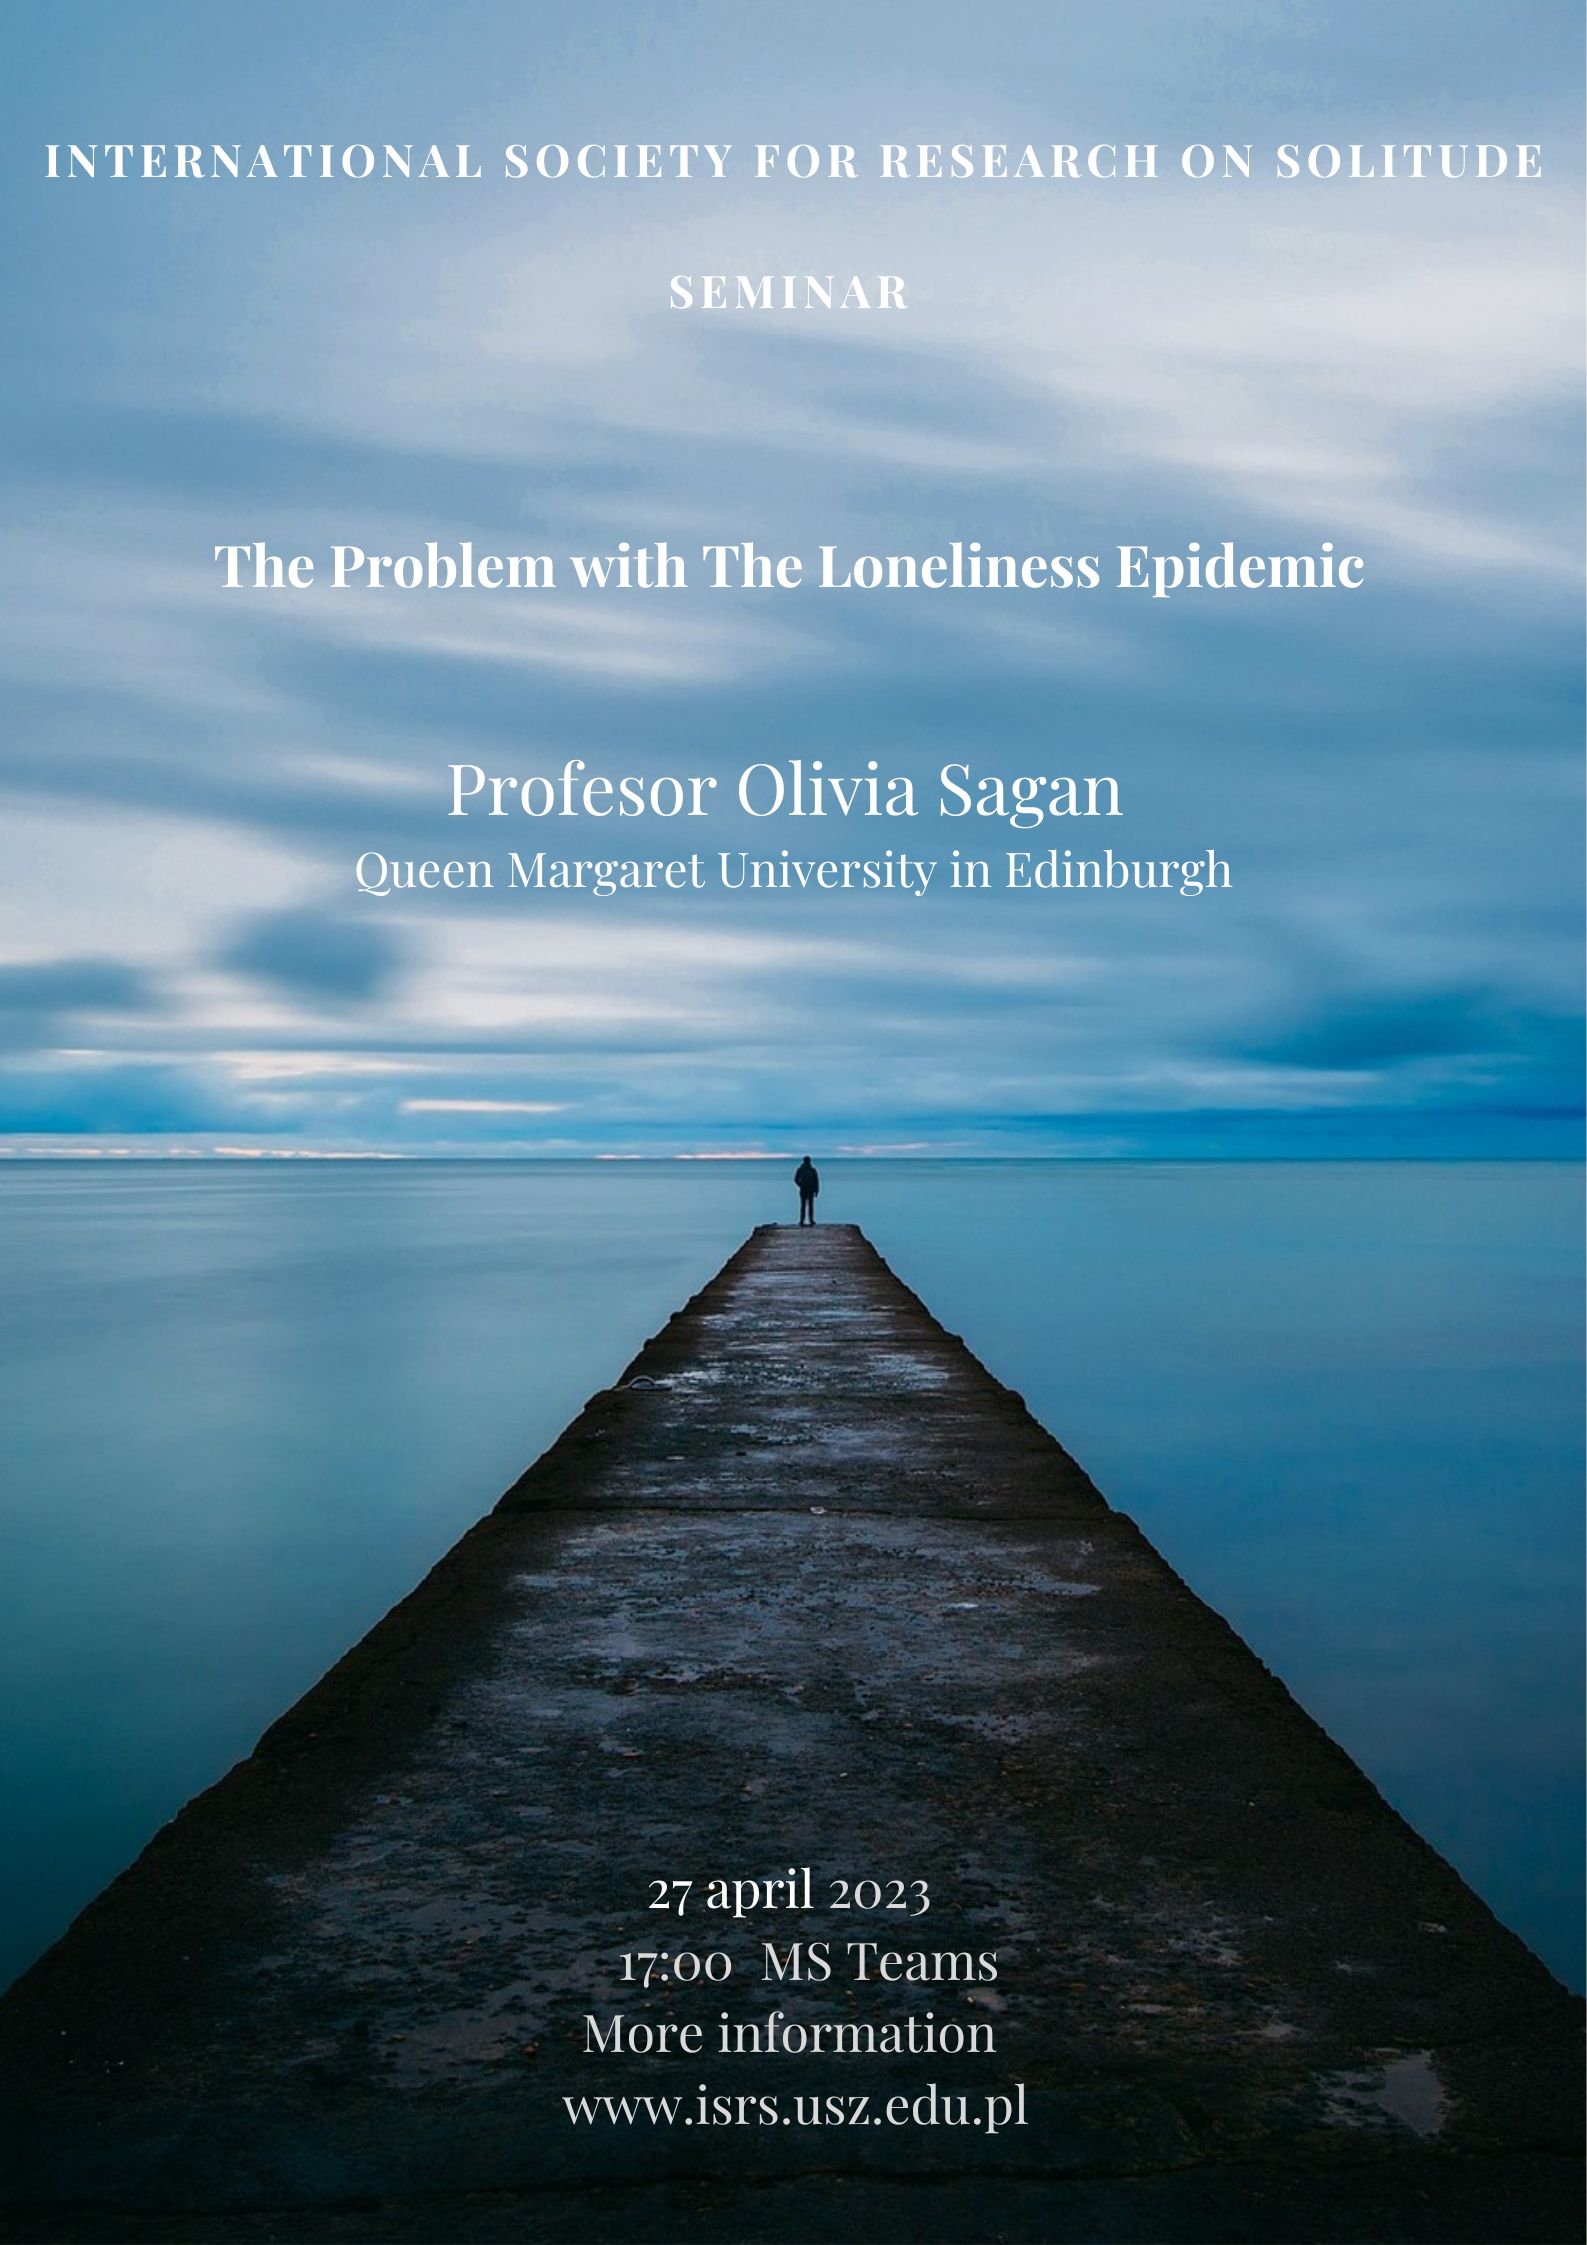 The online seminar on loneliness